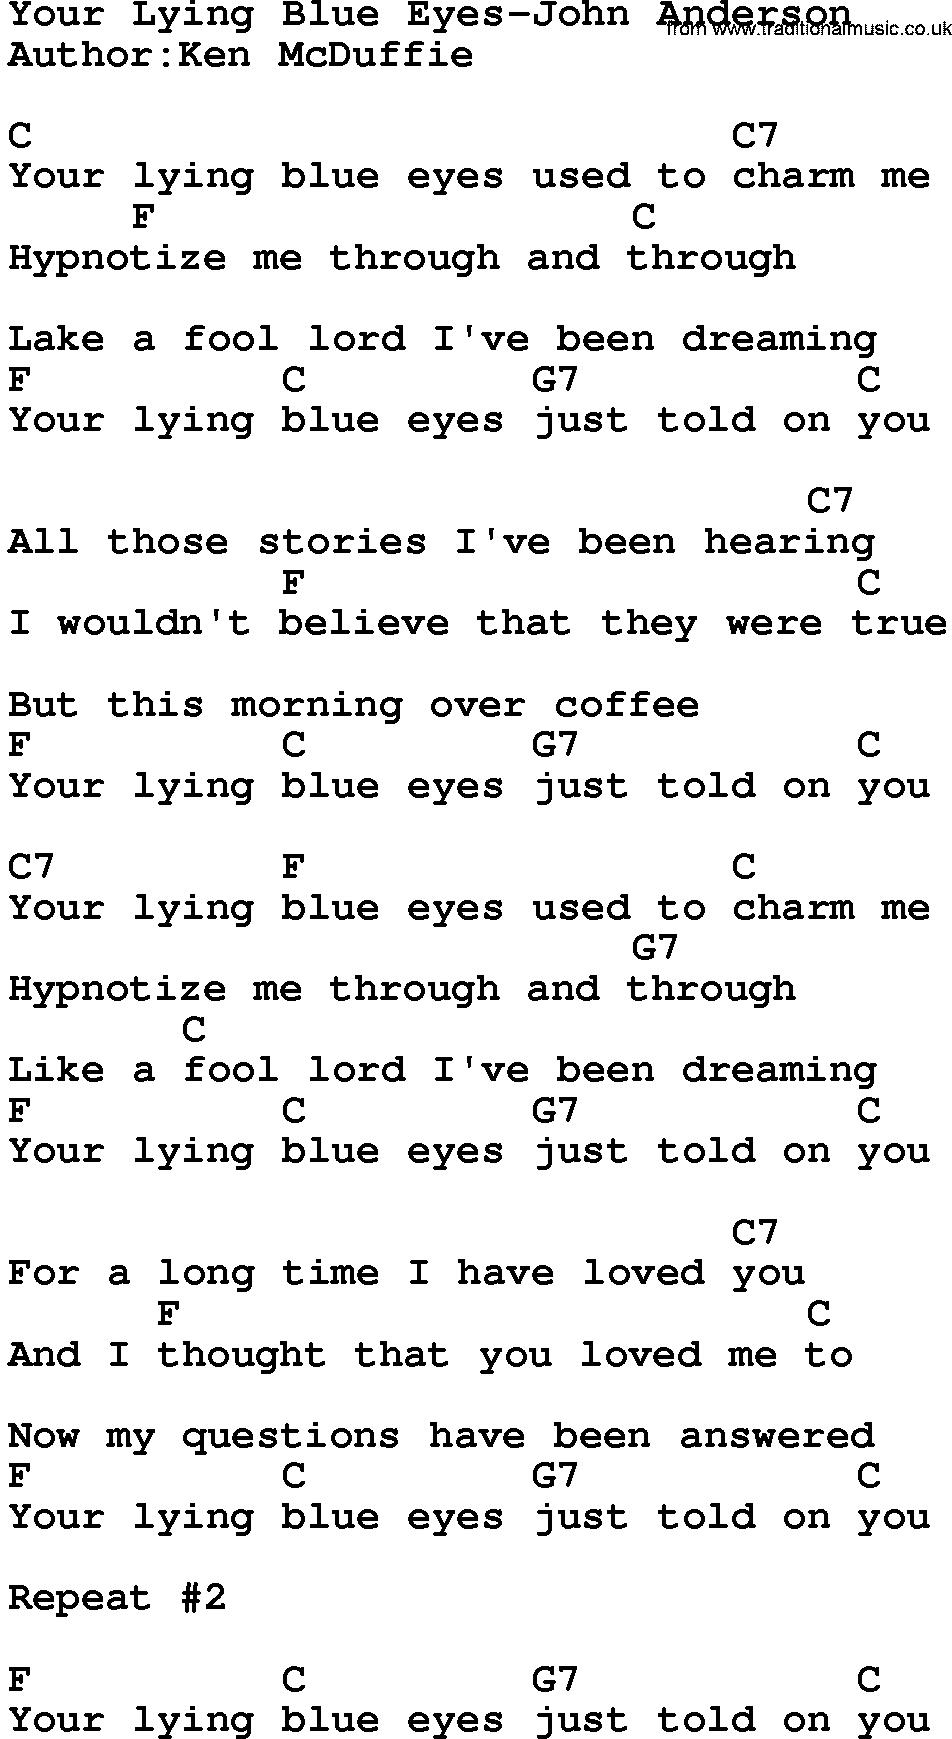 Country music song: Your Lying Blue Eyes-John Anderson lyrics and chords